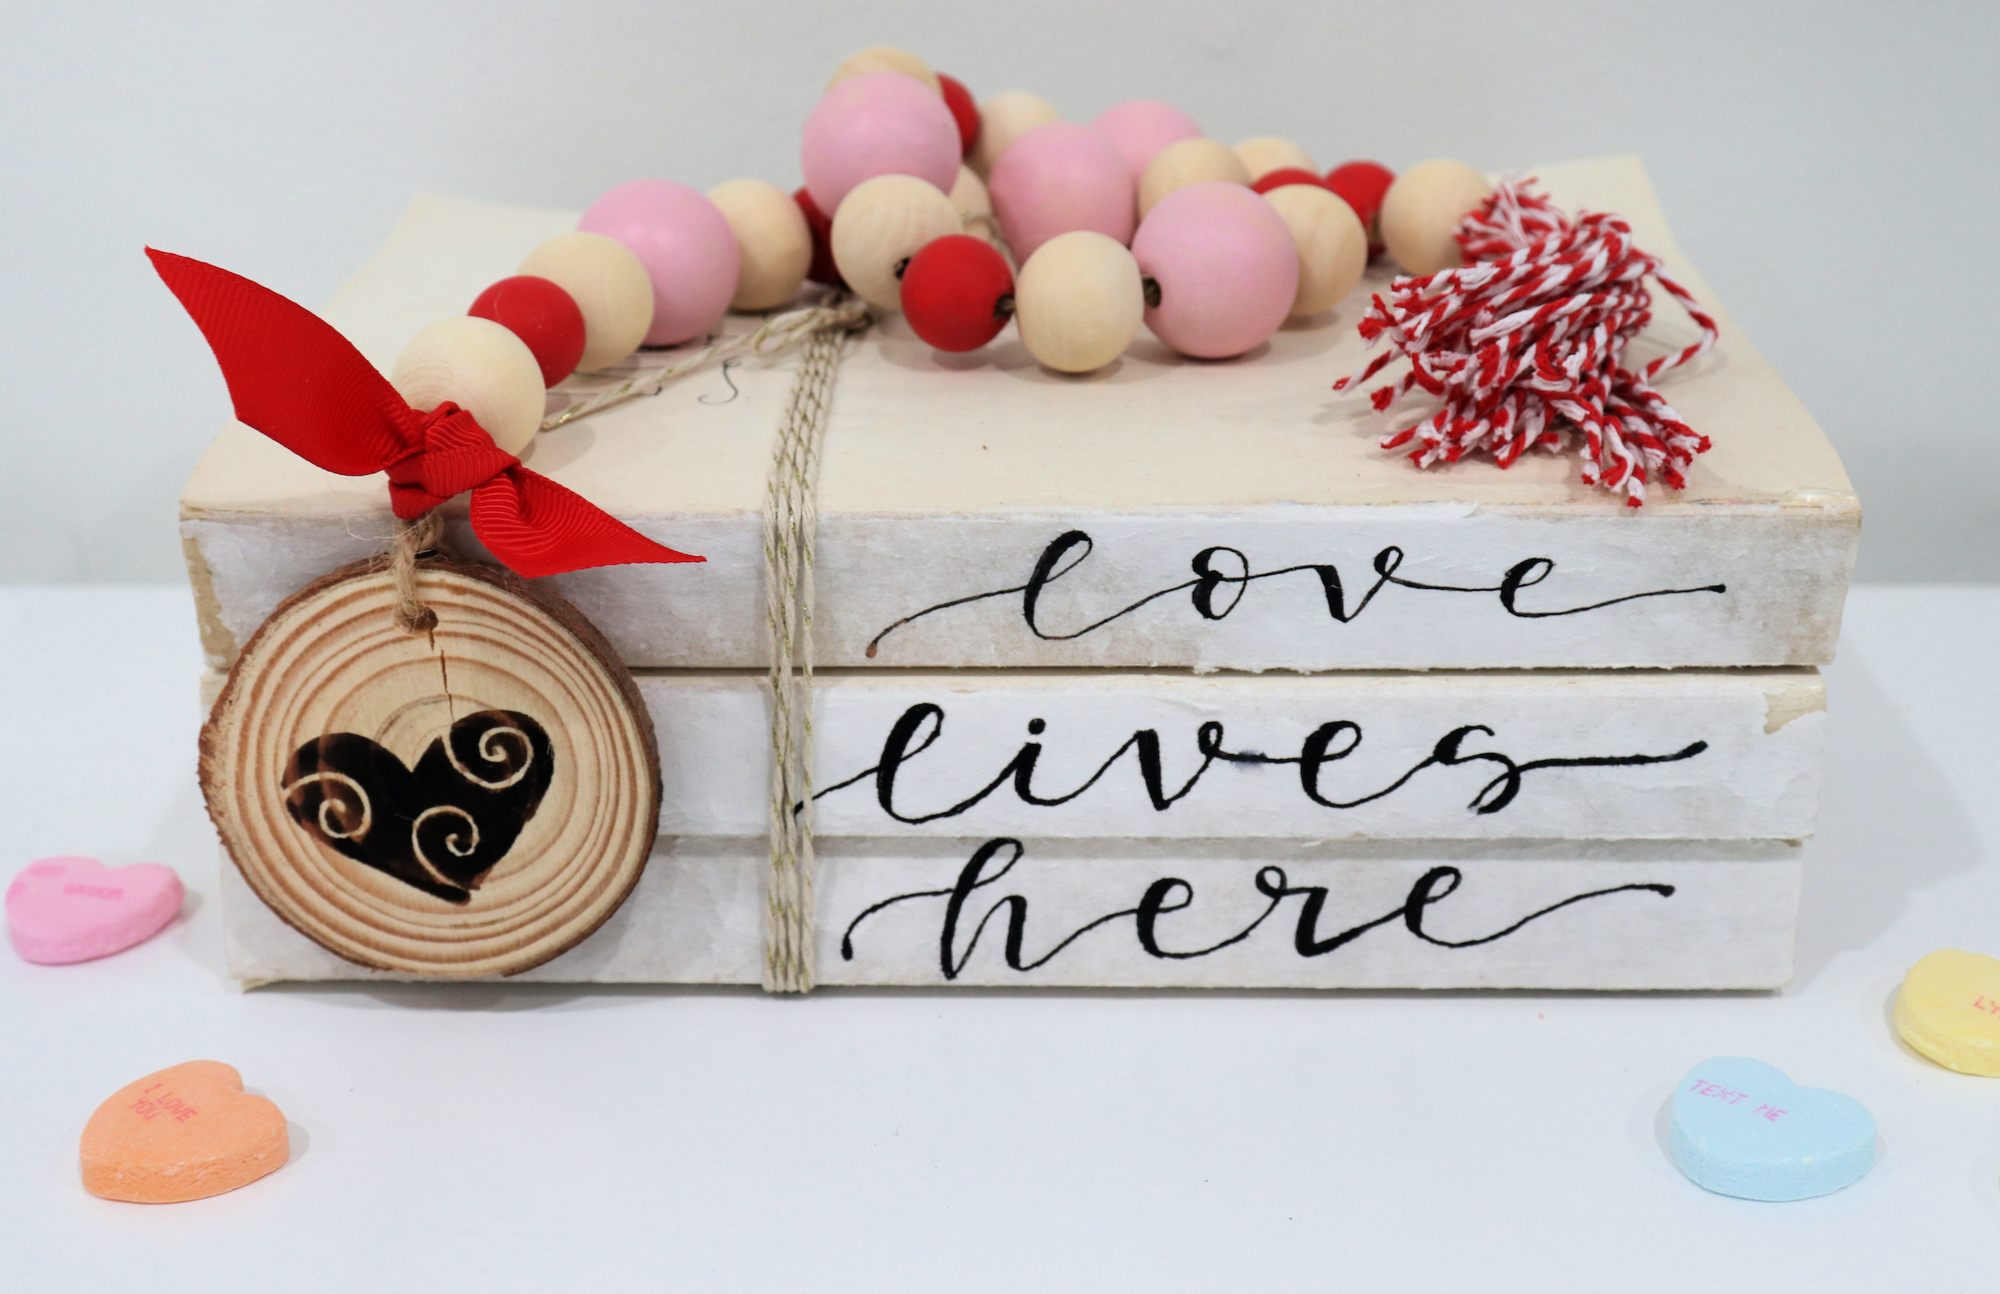 Make Your Own Wood Burned Garland for Valentine's Day